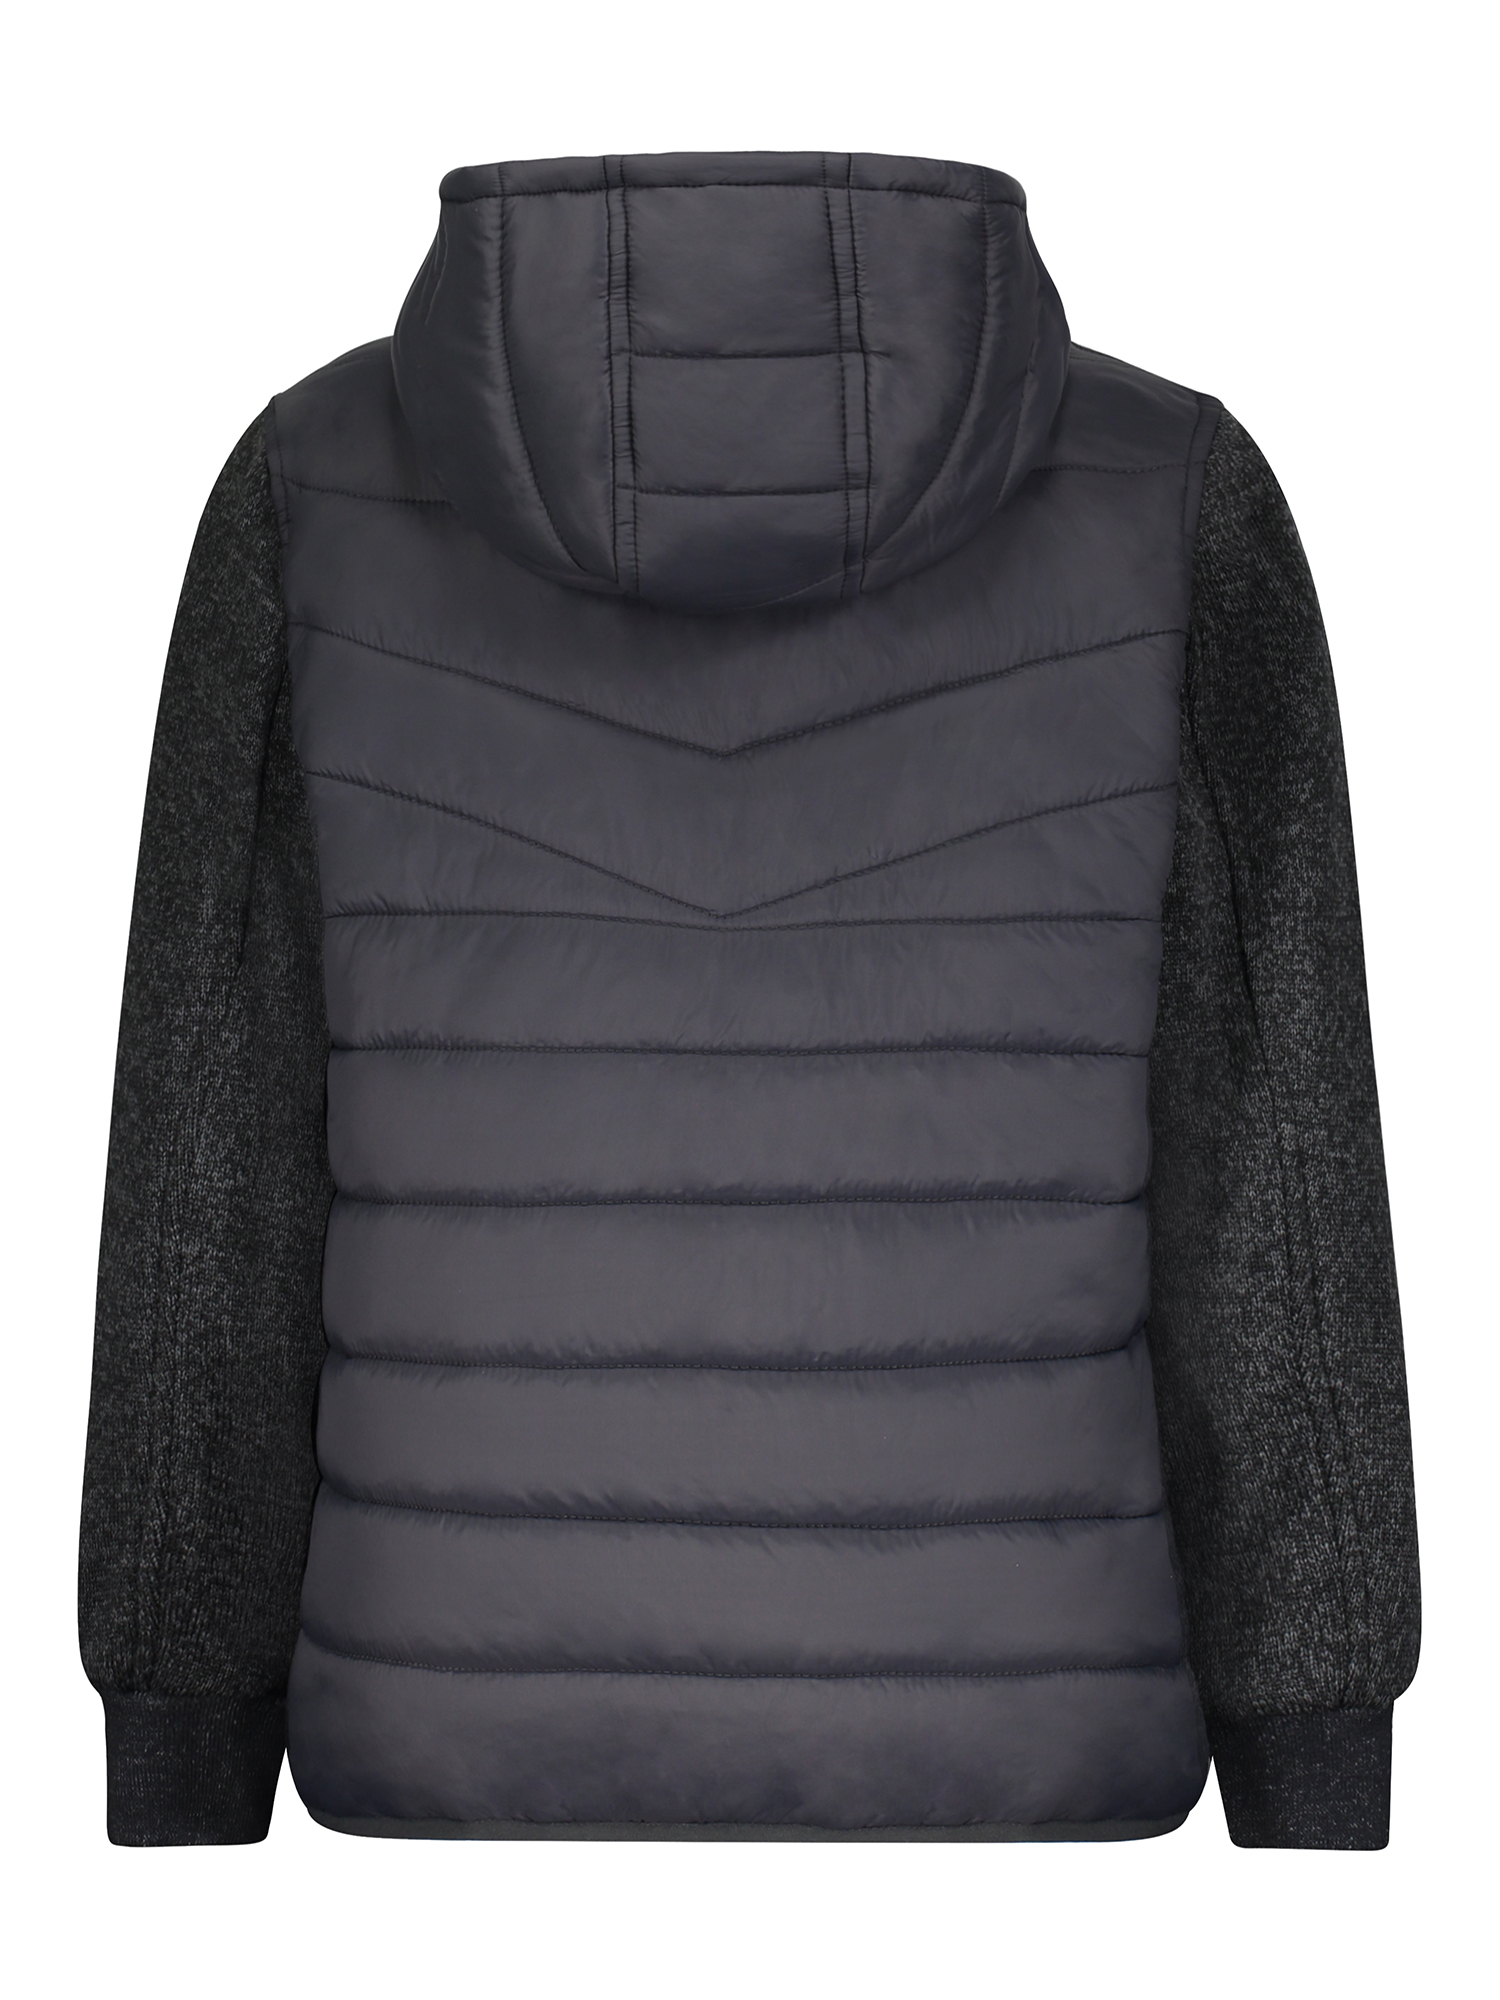 Reebok Boys Puffer Vest with Sleeves, Sizes 4-20 - image 2 of 2